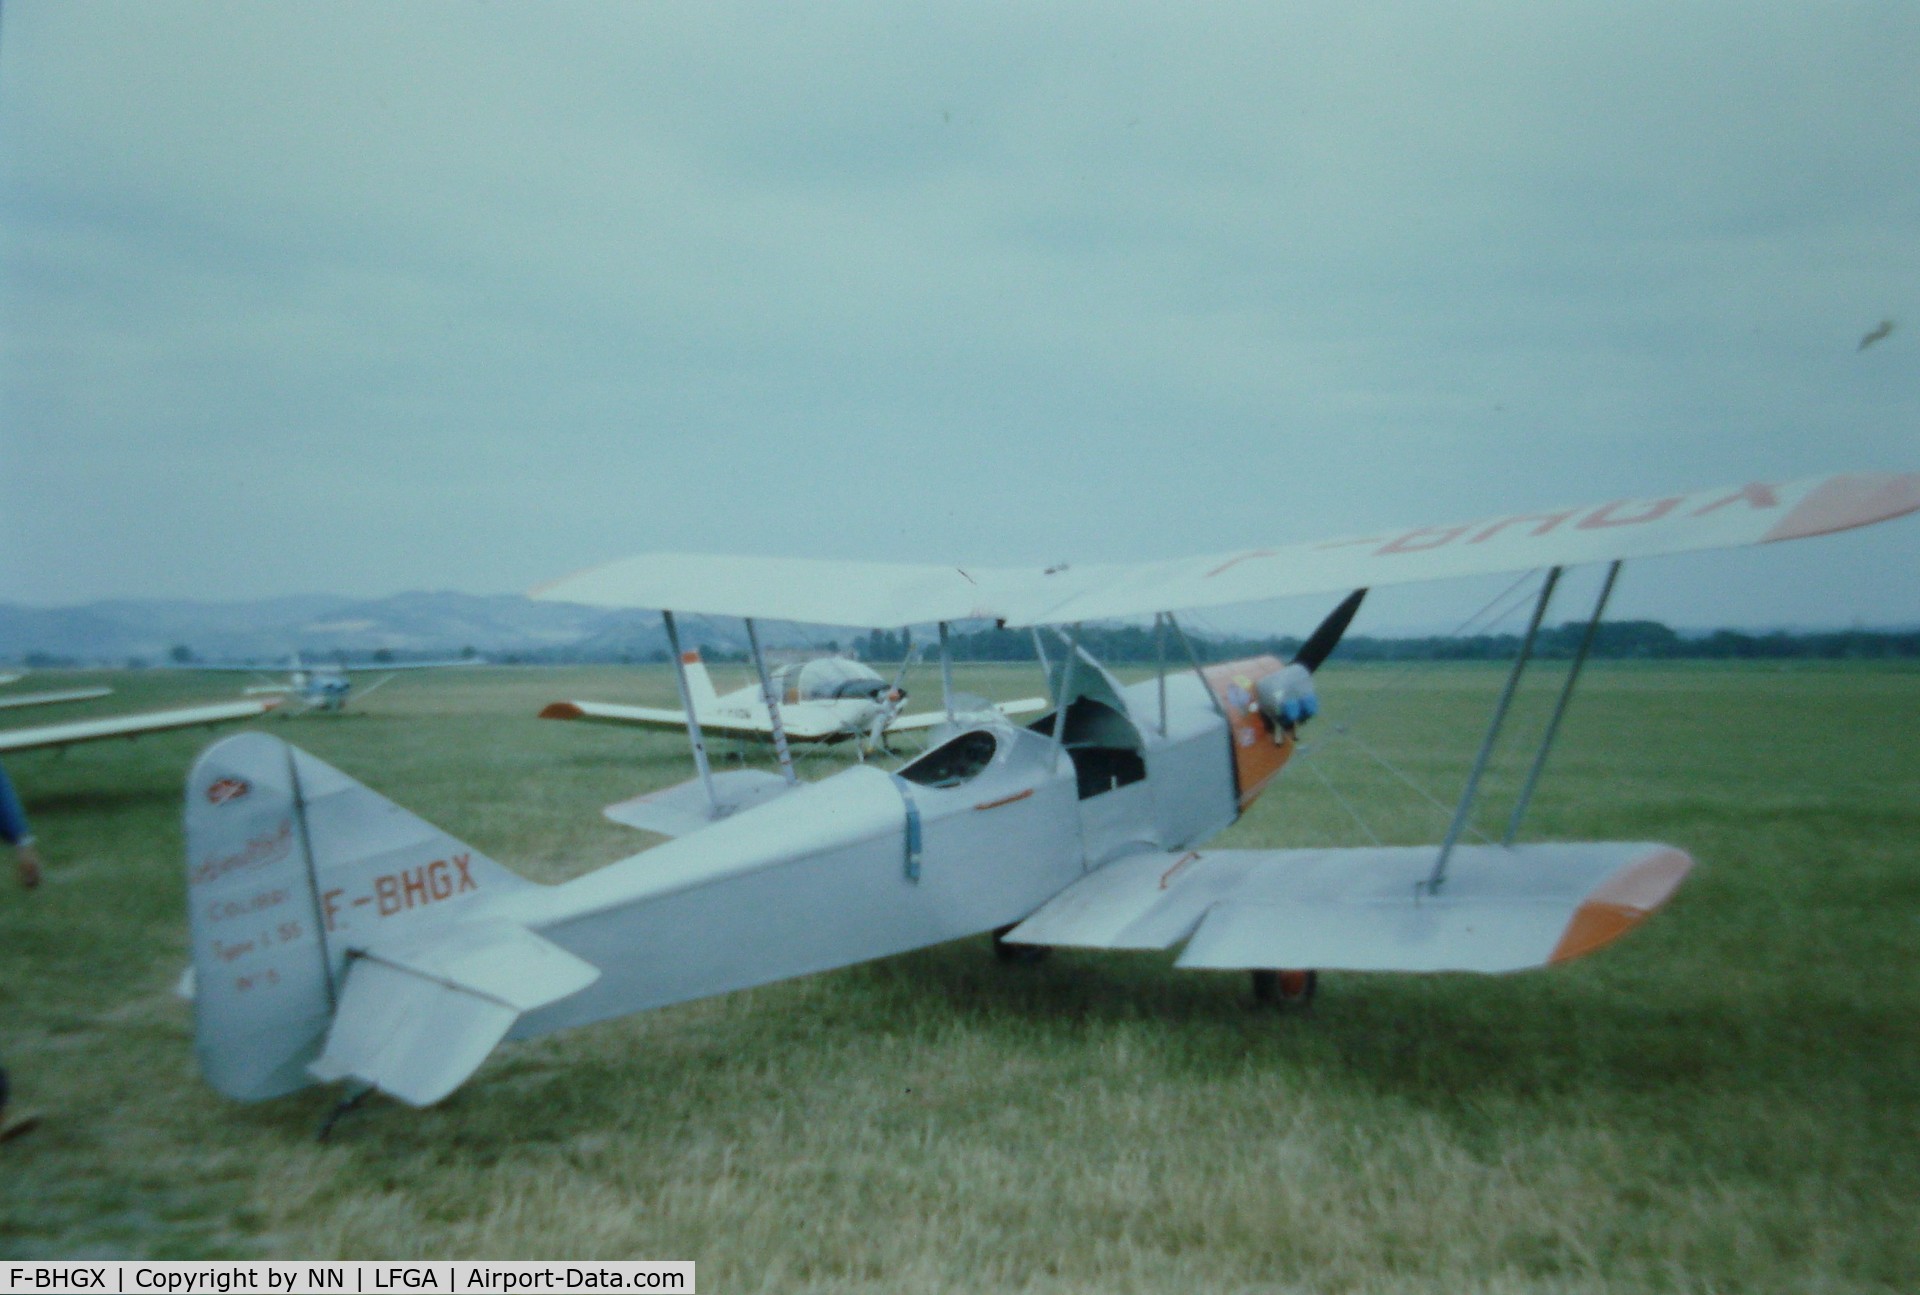 F-BHGX, Leopoldoff L-55 Colibri C/N 5, Picture is about 40 years old and the Leopoldoff had been flown by Philippe Moniot among others